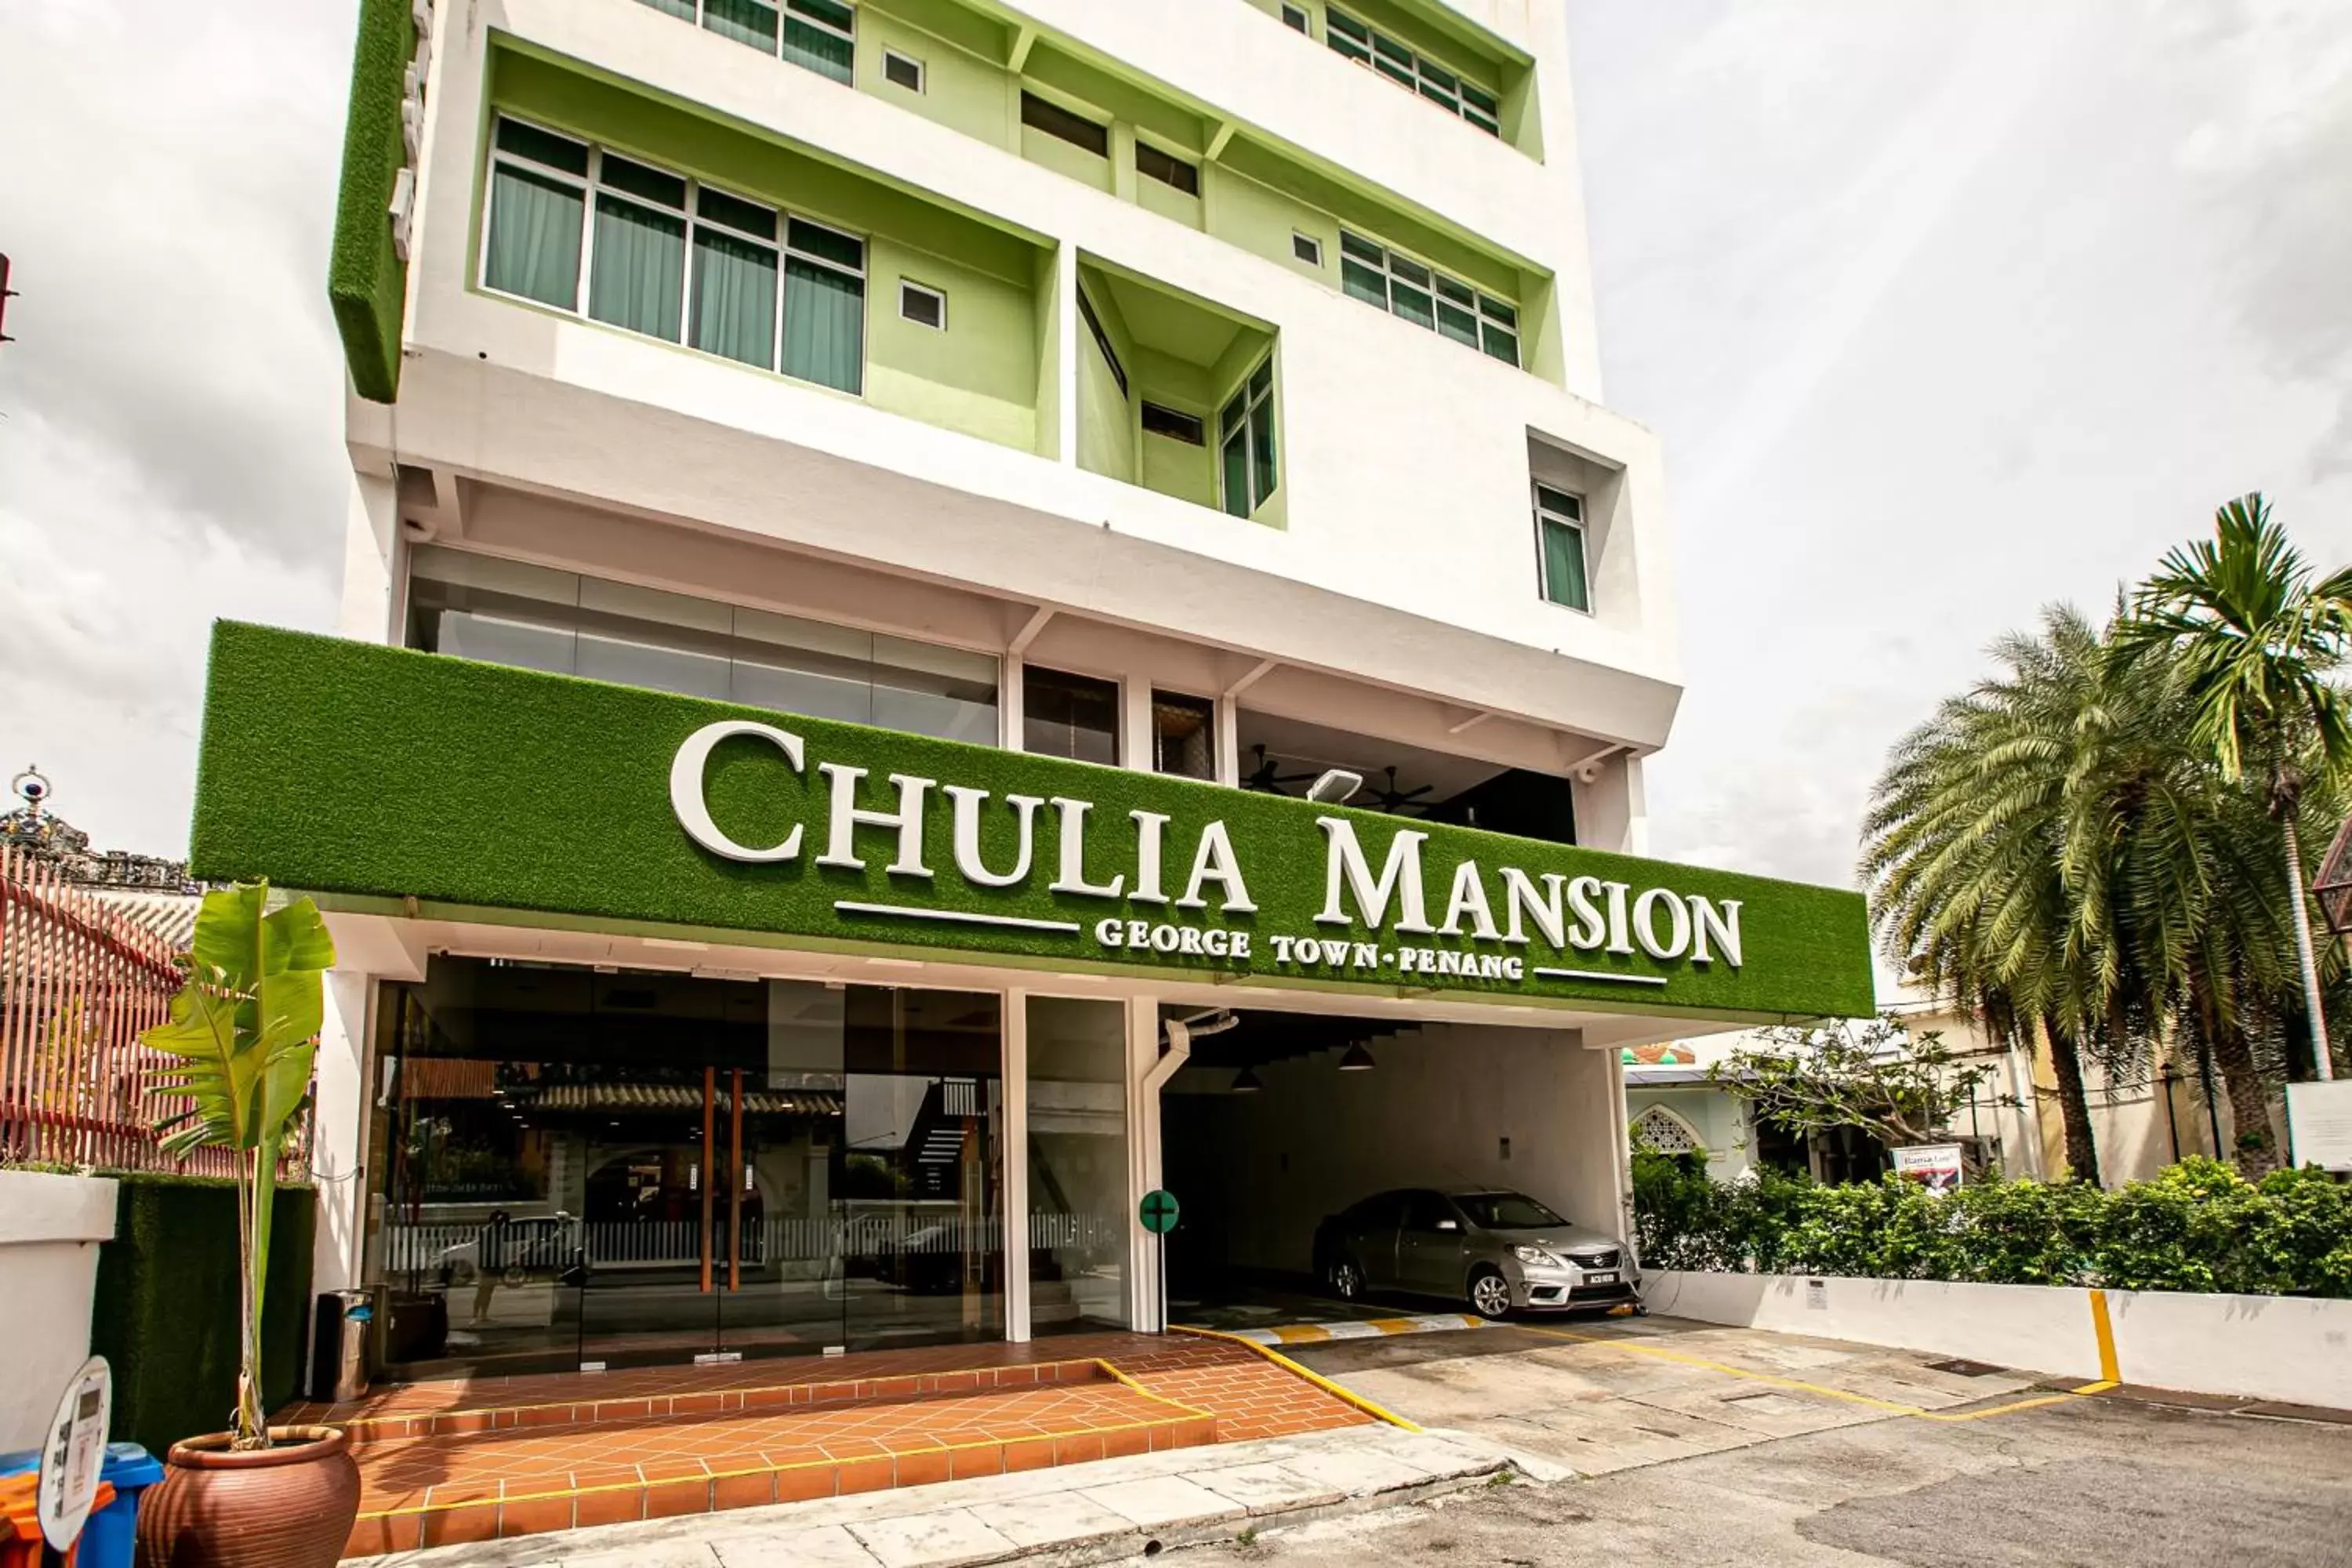 Property building in Chulia Mansion